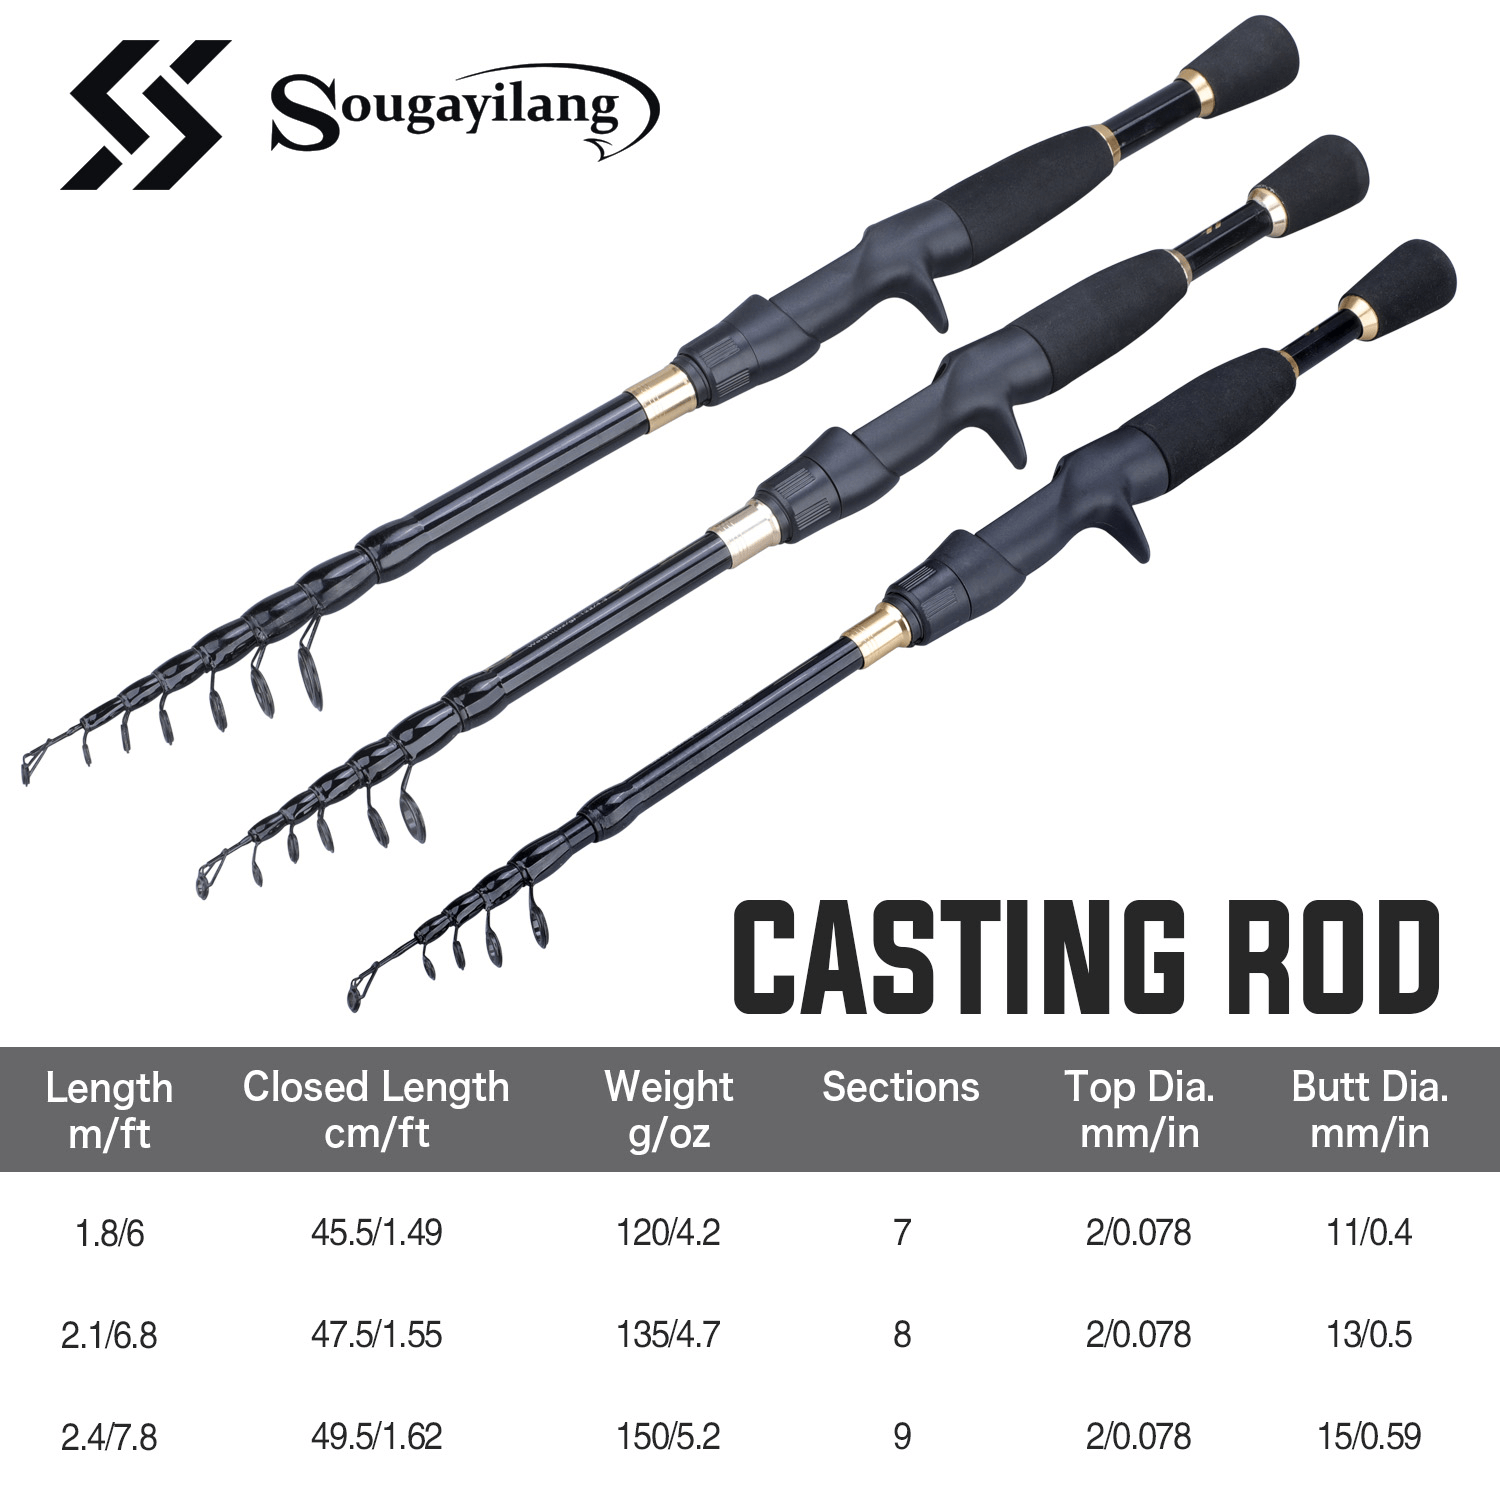 TITANCAST - Spinning and Casting Rod 1.8-2.4m